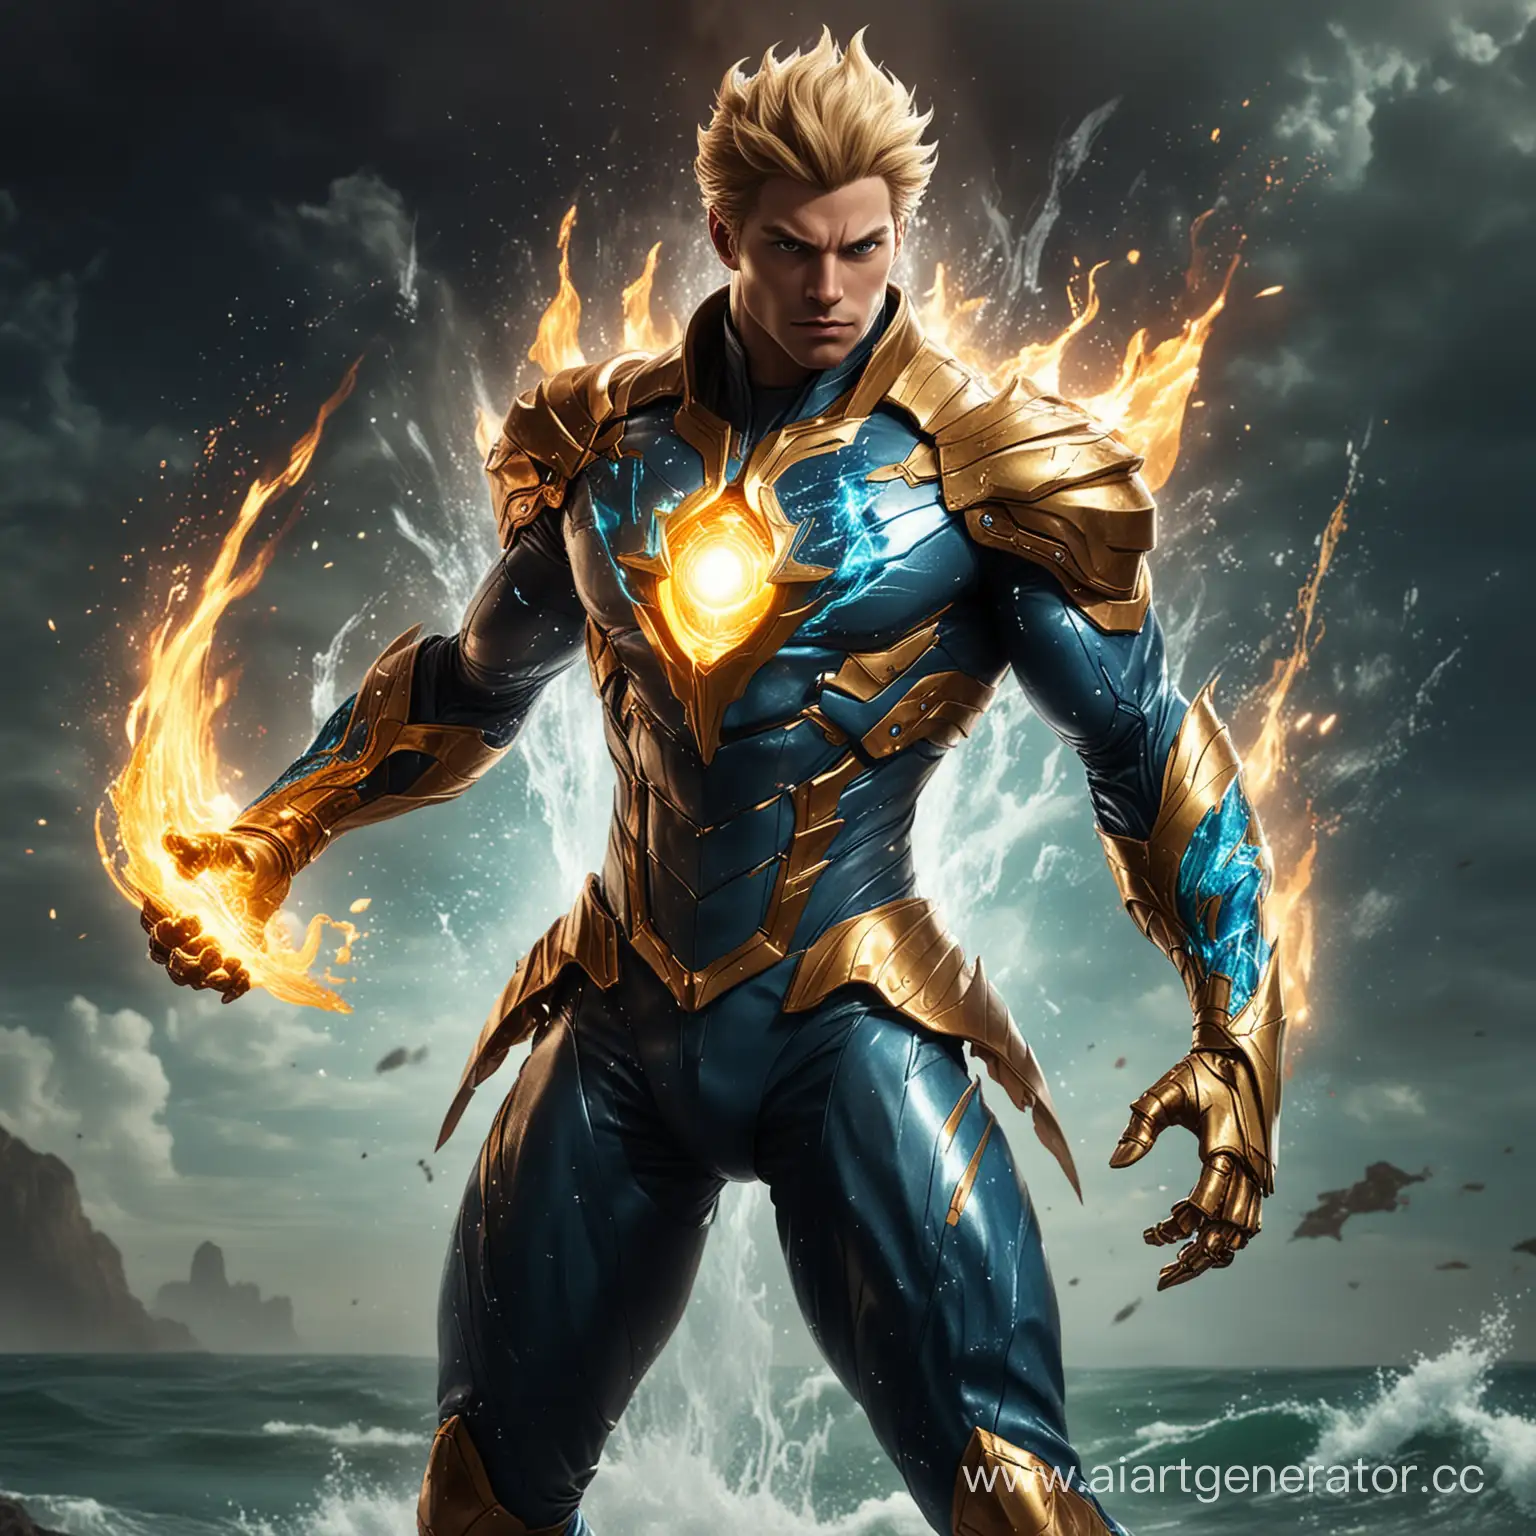 Terra Tempest:He is a human with powers Elemental tempest, with a suit that channels the power of earth, wind, fire, and water, capable of unleashing devastating elemental attacks.make it cinematic